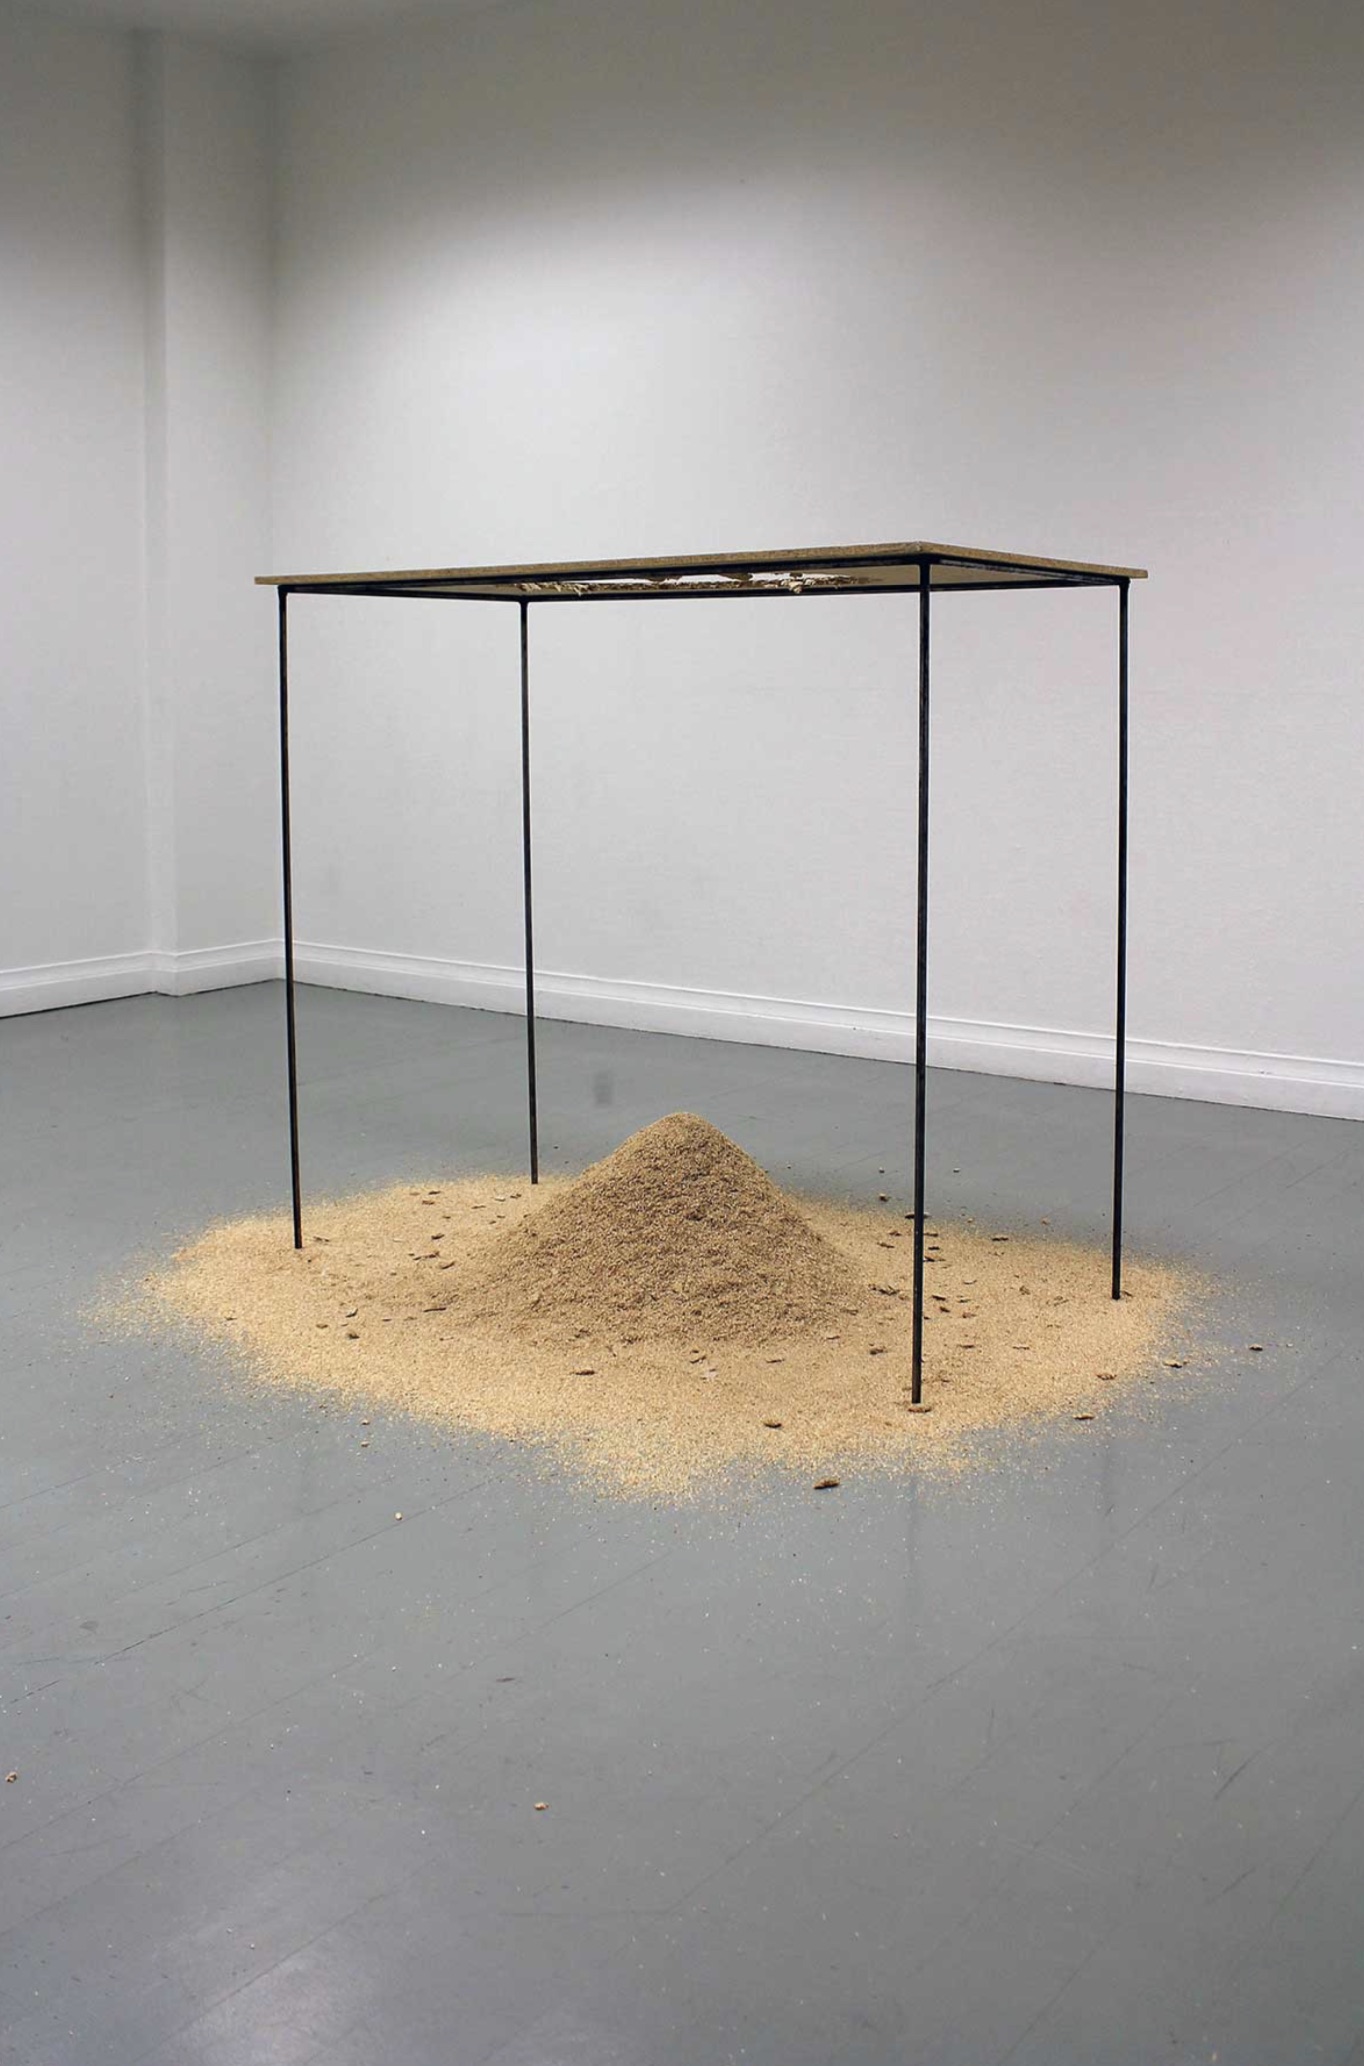 Deal With The Sun, 2013, Steel, chipboard, sawdust, Cm 80 x 160 x 180